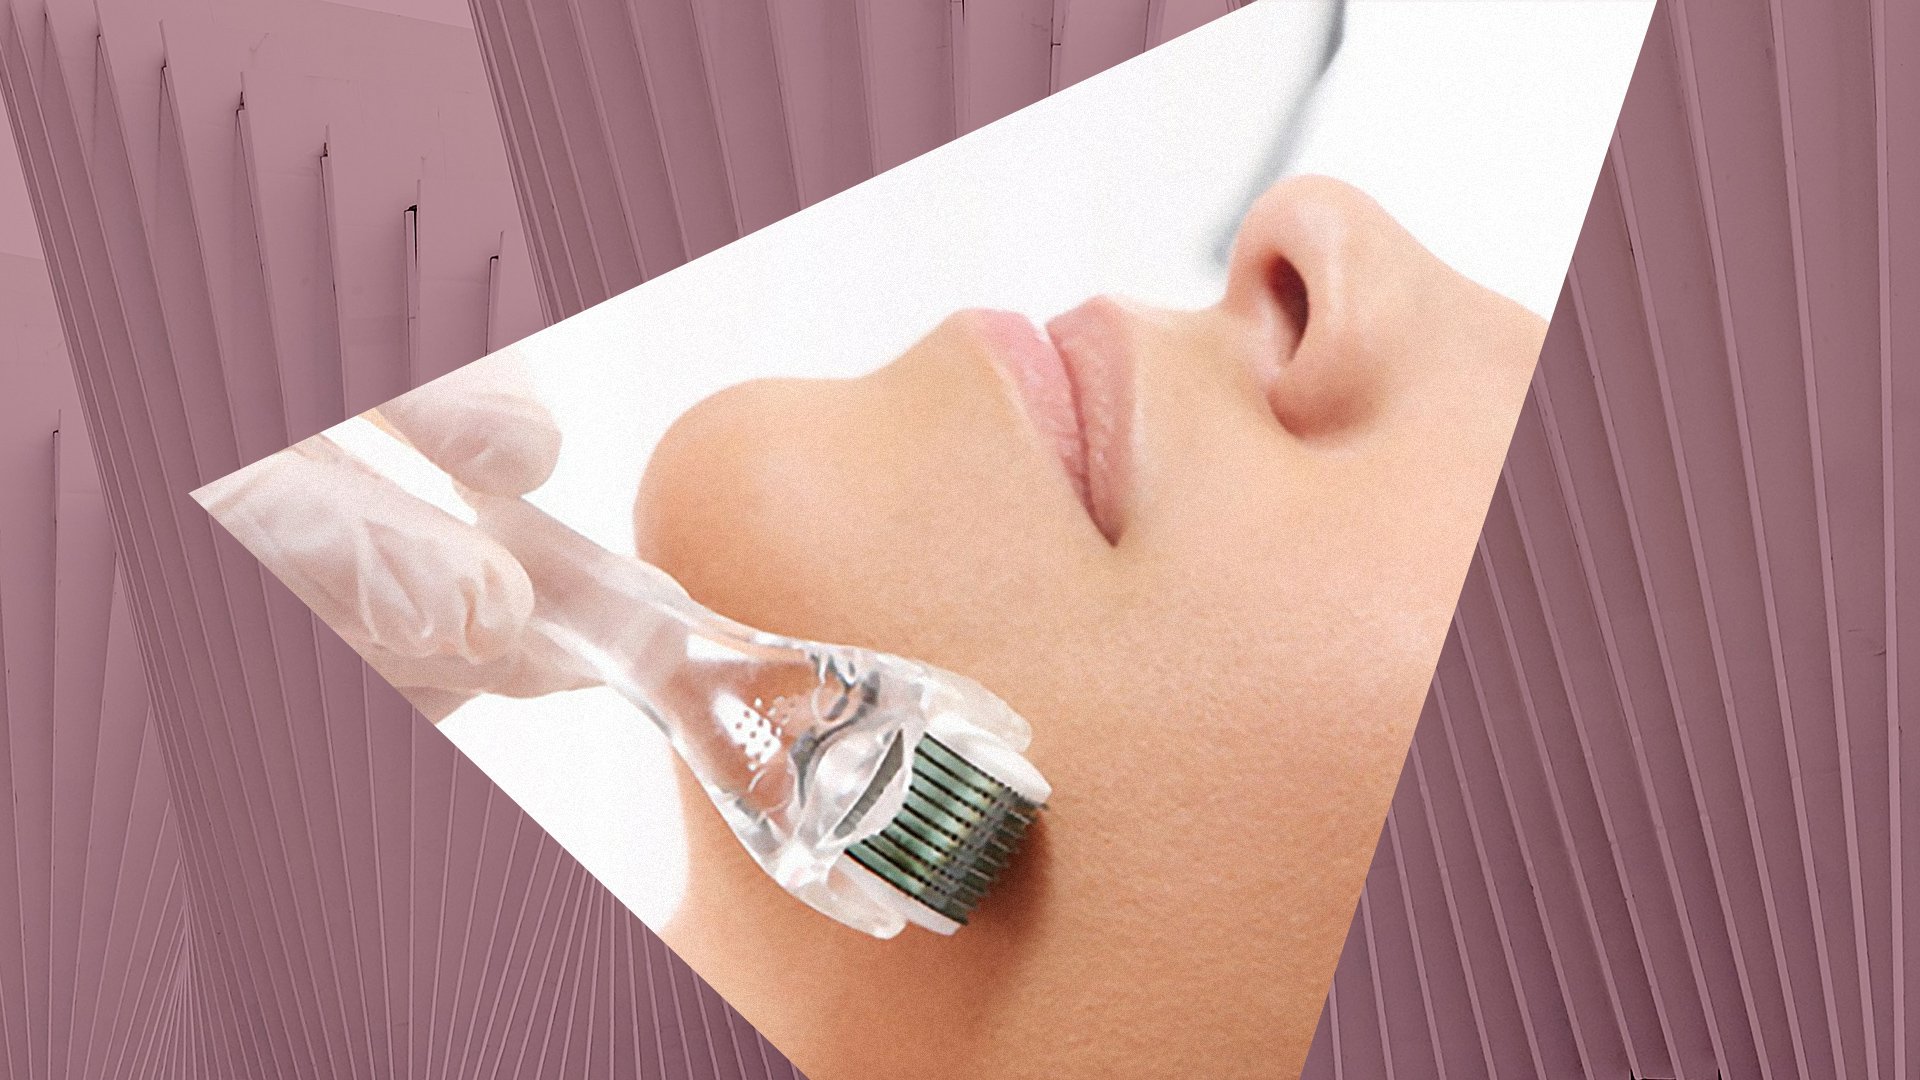 Microneedling 101 - Benefits for Your Skin